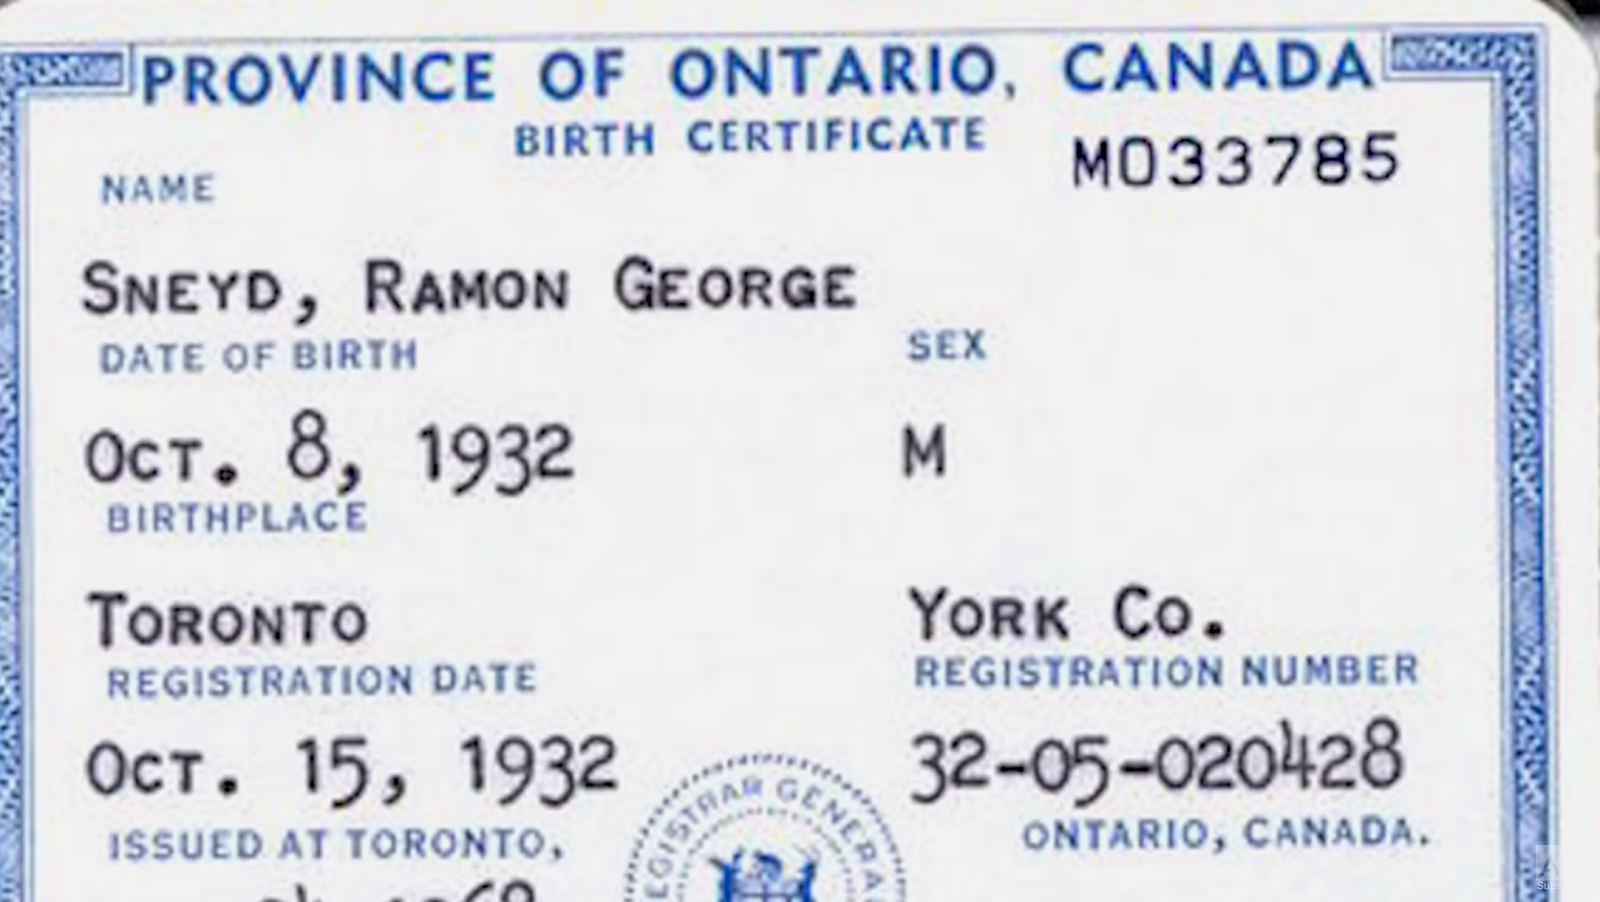 A close-up of a birth certificate

Description automatically generated